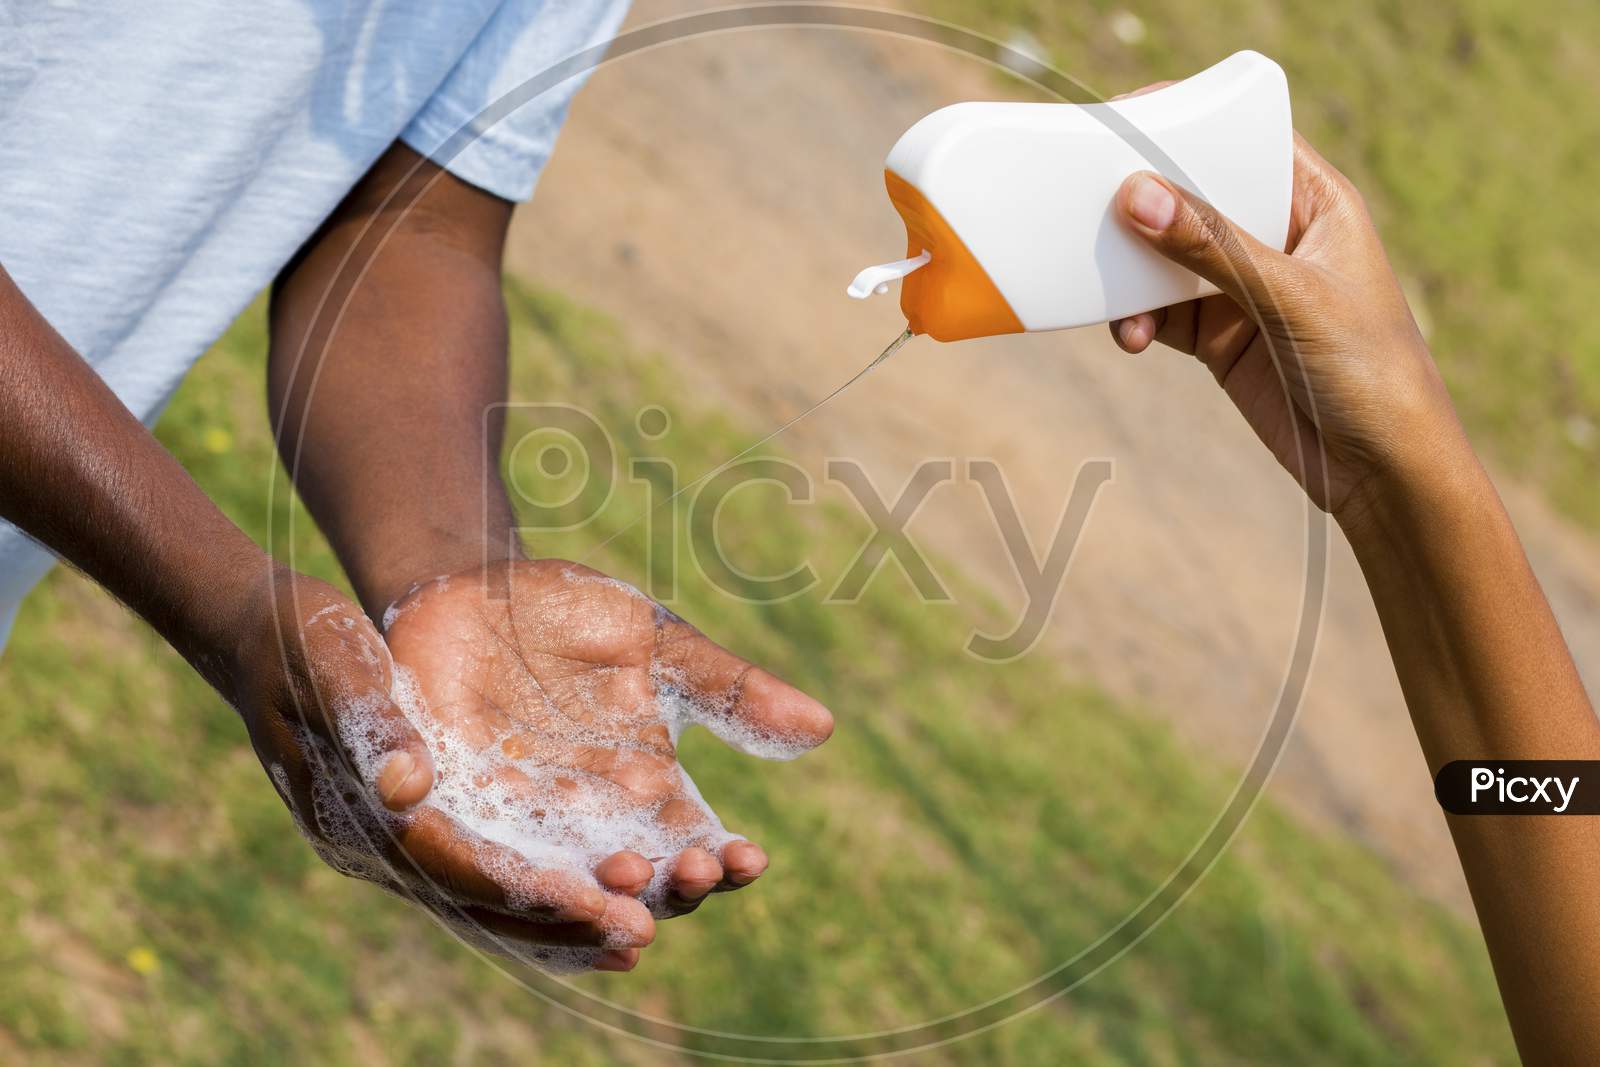 a man washing his hands by soap to maintain hygiene.stay healthy.avoid germ and virus.